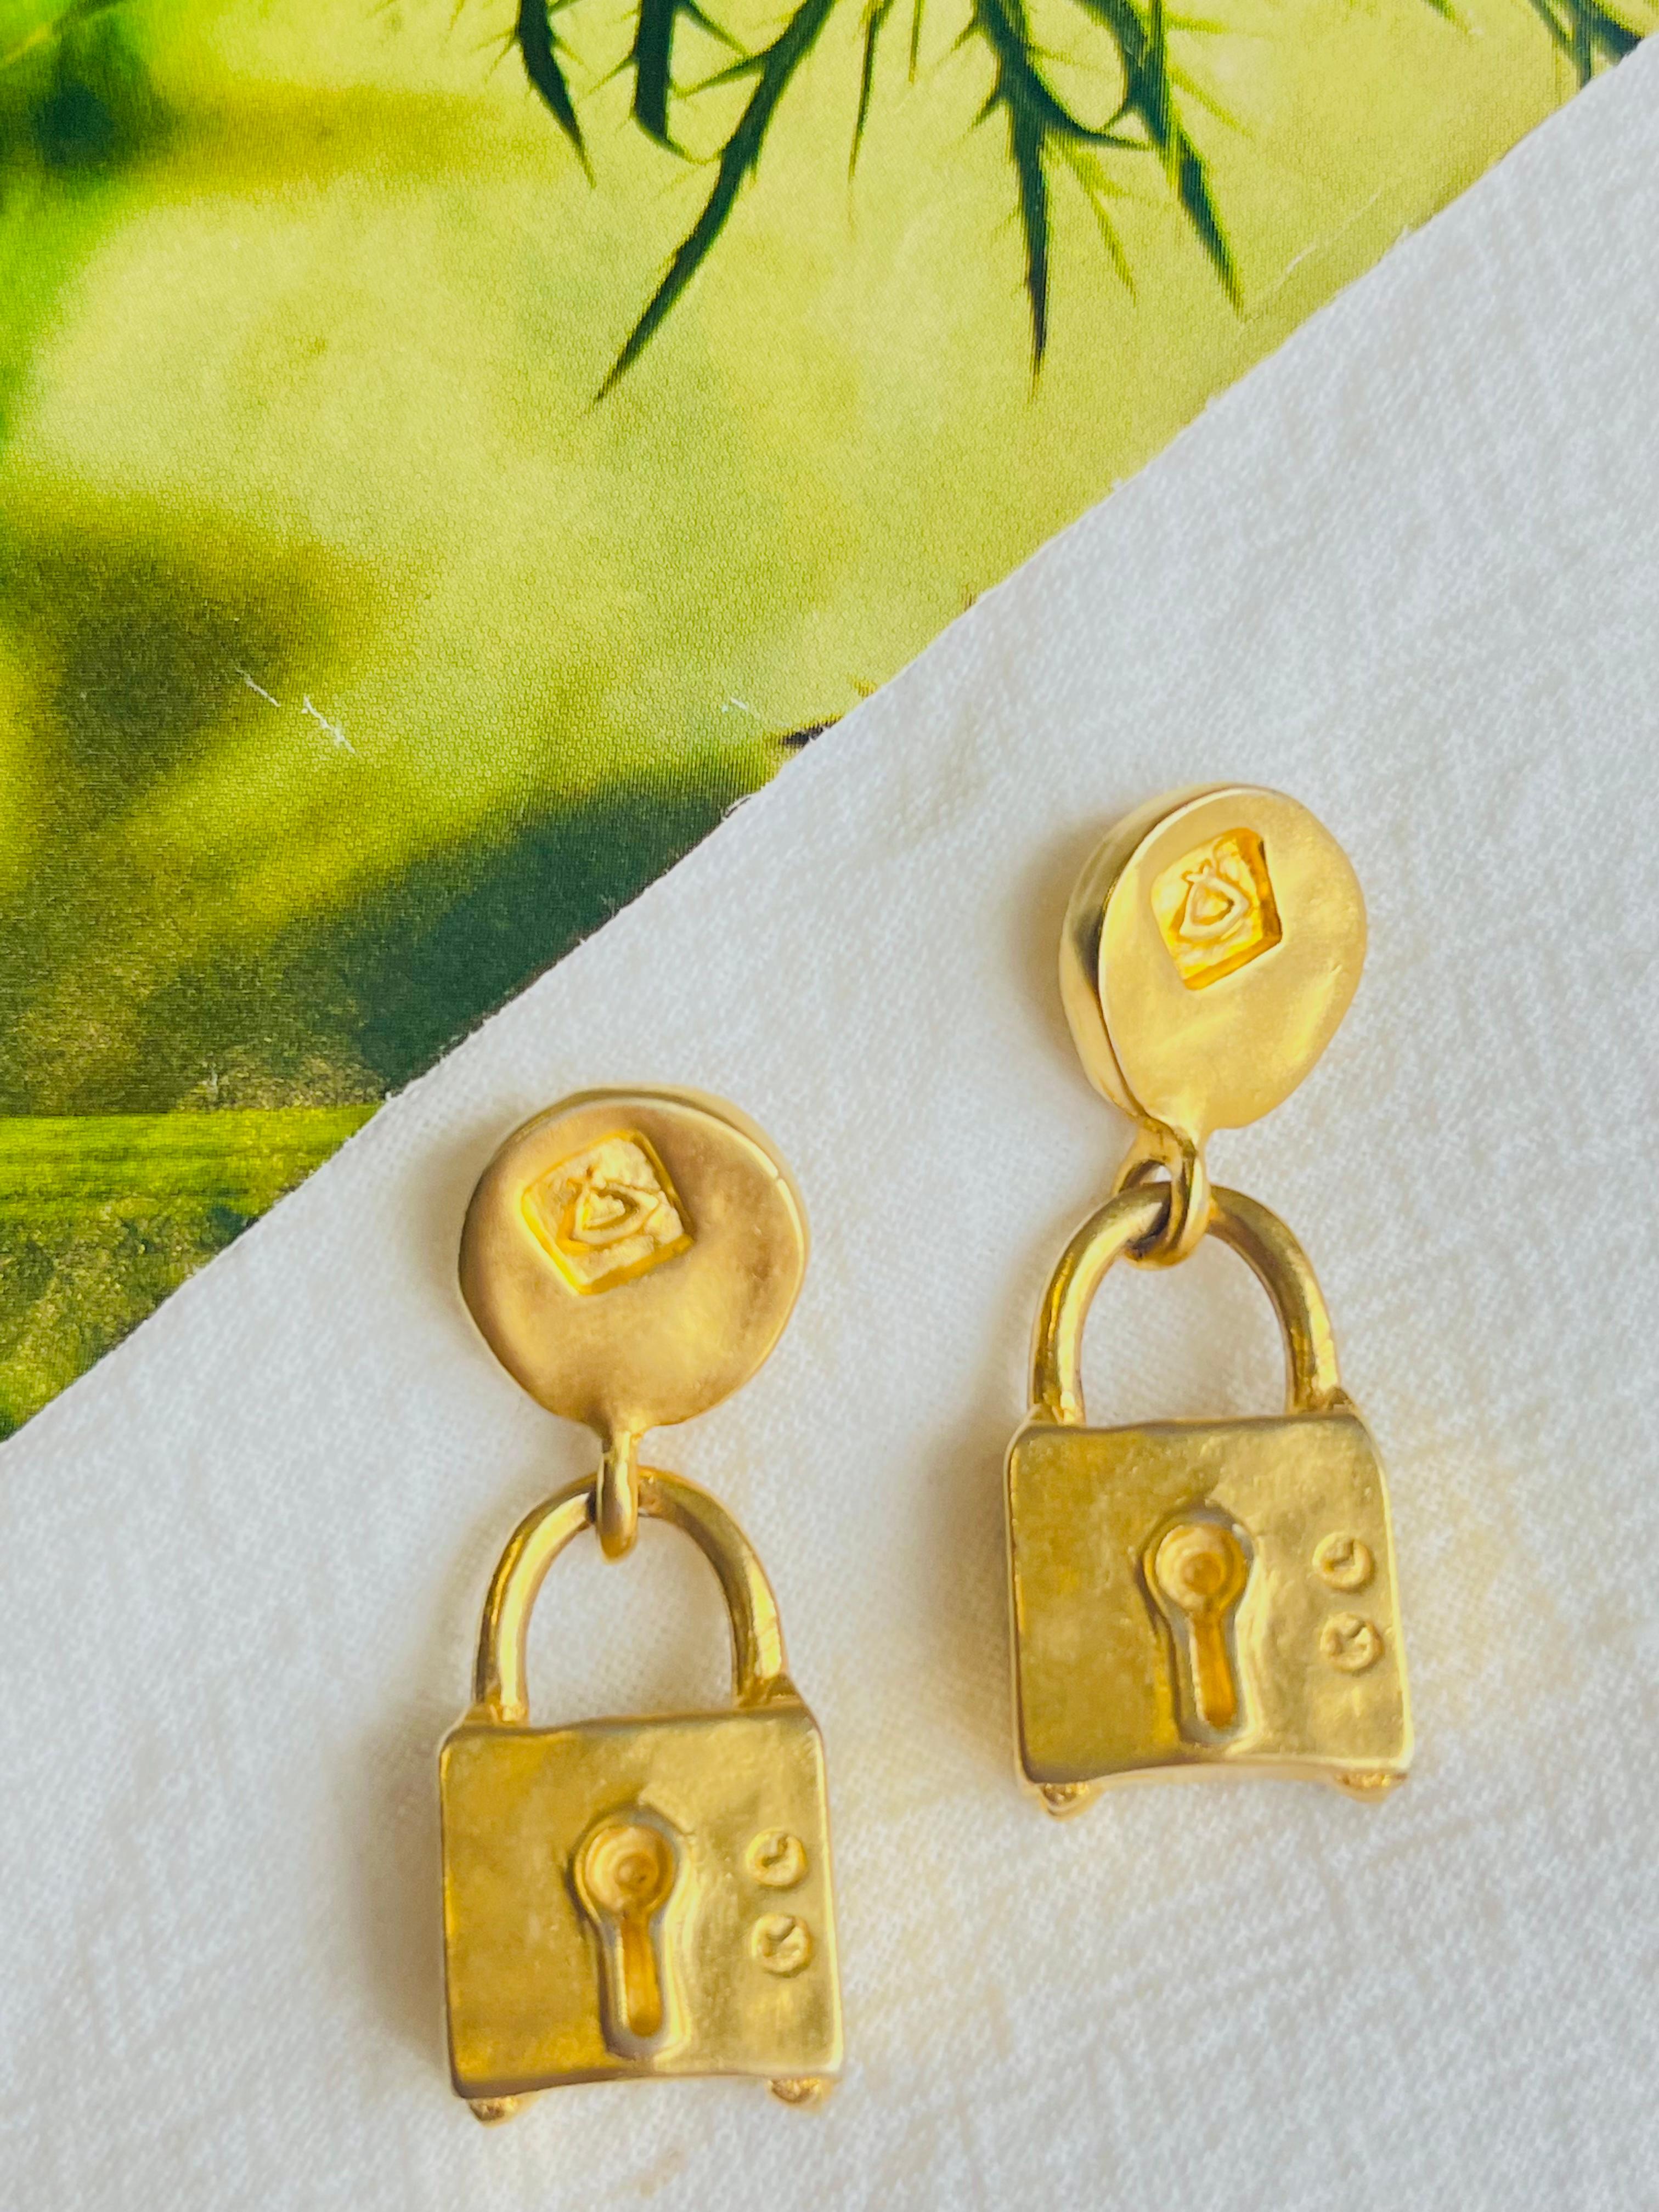 Karl Lagerfeld Vintage Classic Padlock Circle Logo Modernist Chunky Drop Pierced Earrings, Gold Plated

Very good condition. Not original earrings backs. 100% Genuine. 

A very beautiful pair of earrings by Karl Lagerfeld, signed KL at the